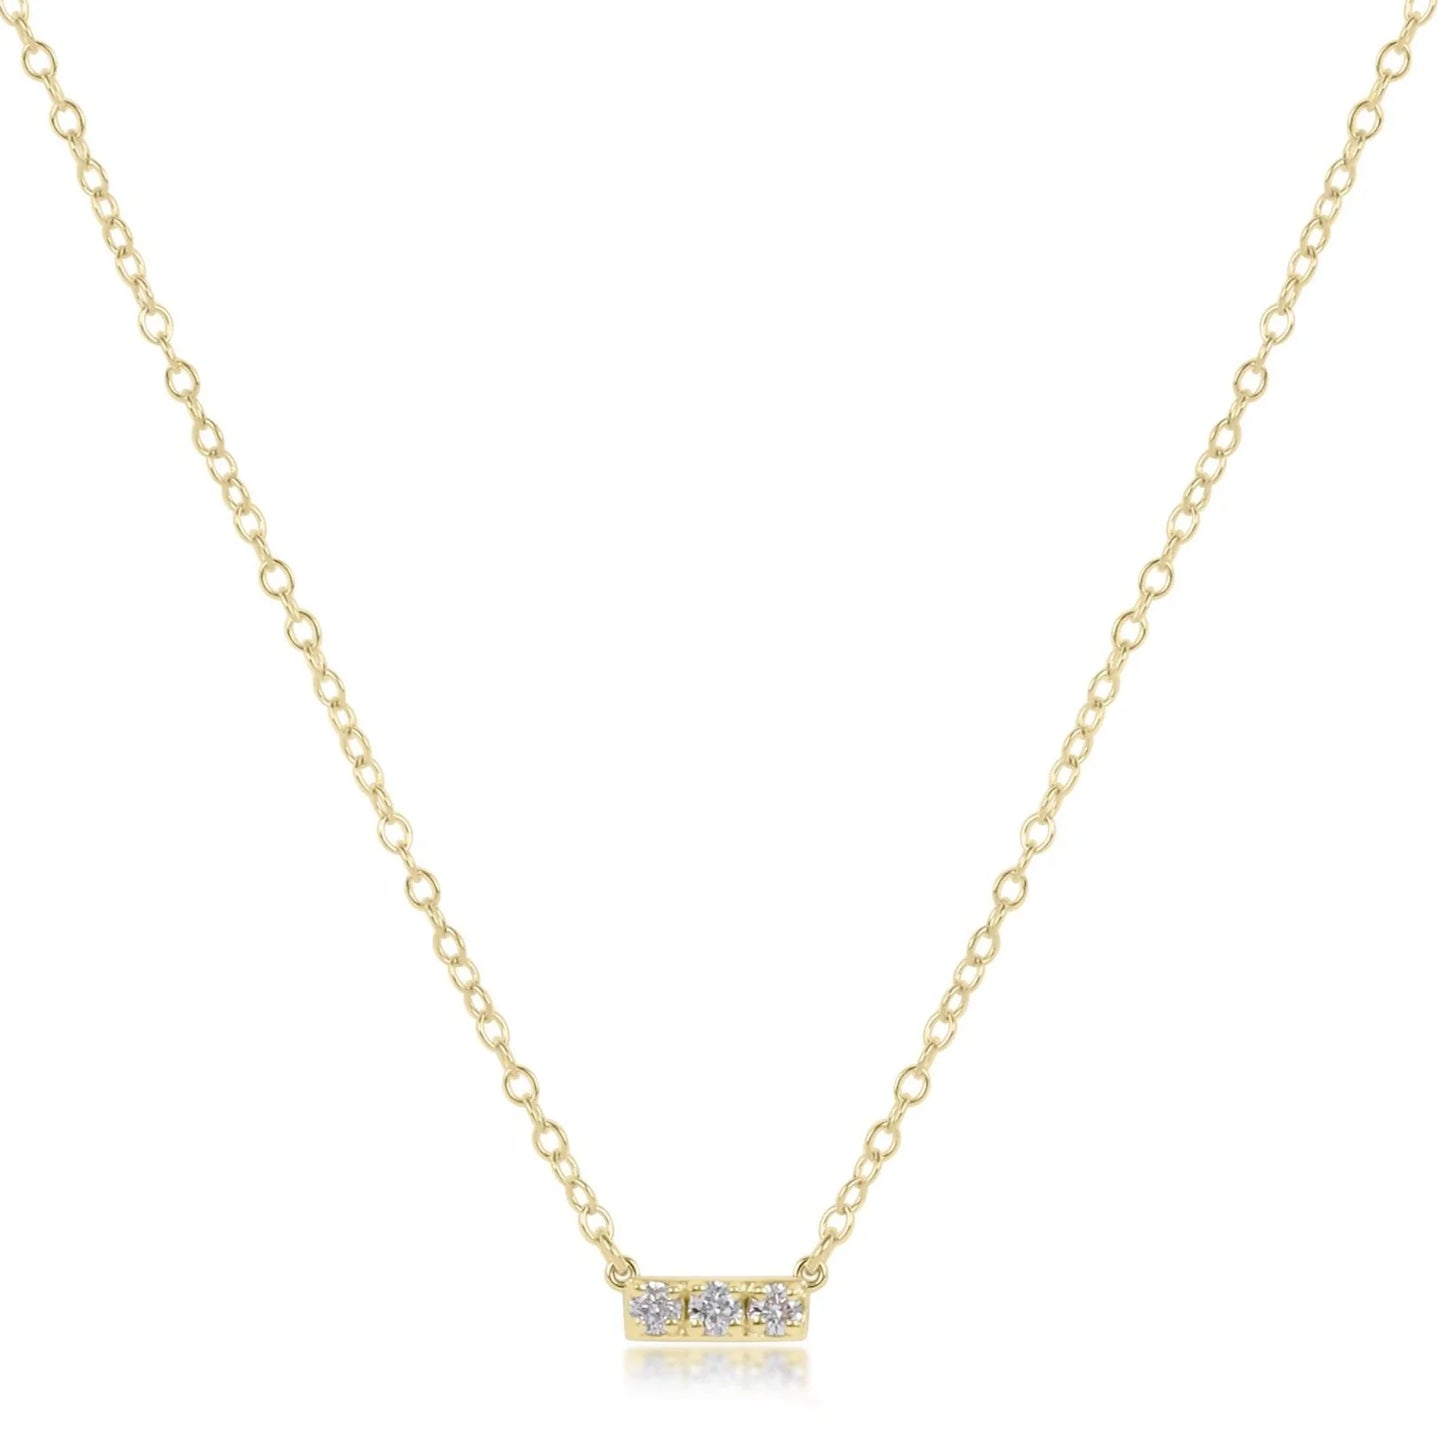 14kt gold and diamond significance bar necklace - three